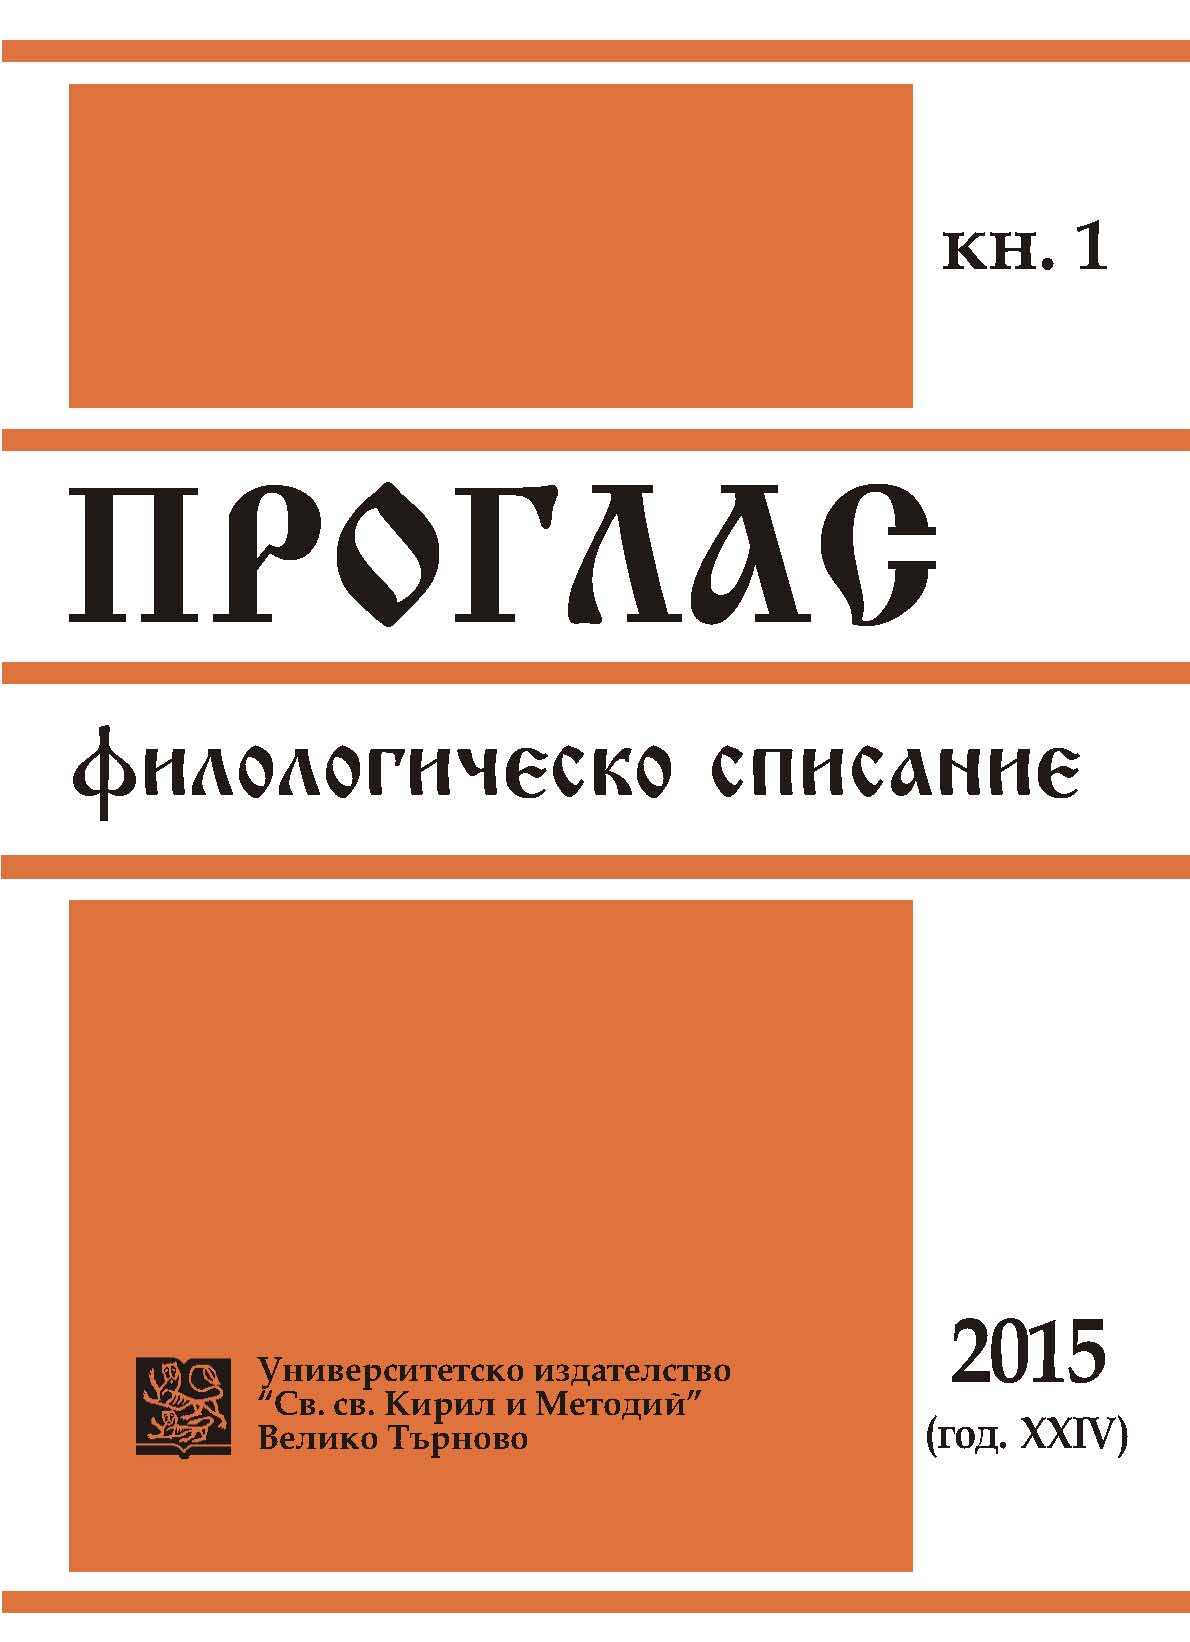 A Contribution to the Study of Two Bulgarian Revival Villages (about: Darinka Karadzhova, “Sliven and Elena...”) Cover Image